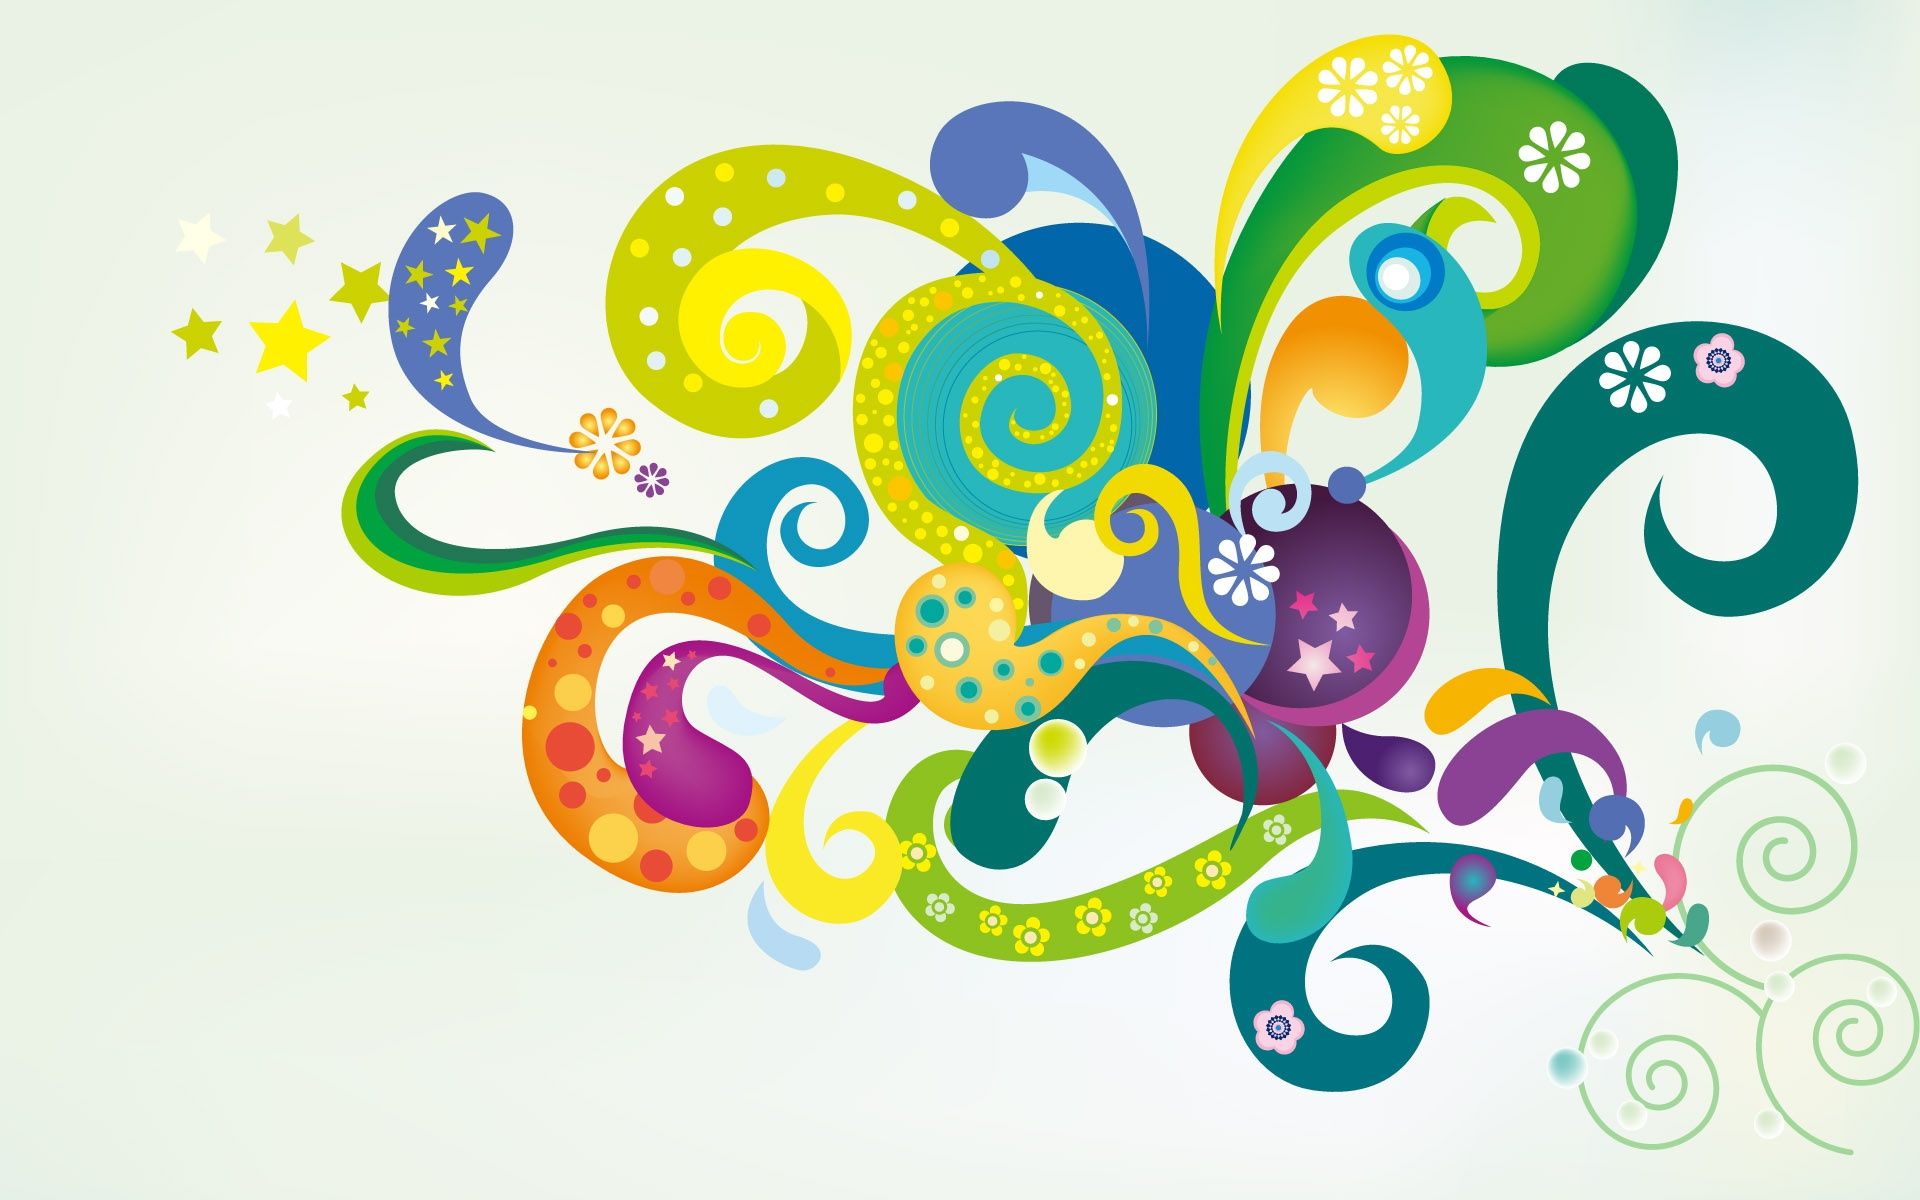 Design Vector High Quality Wallpaper in jpg format for free download